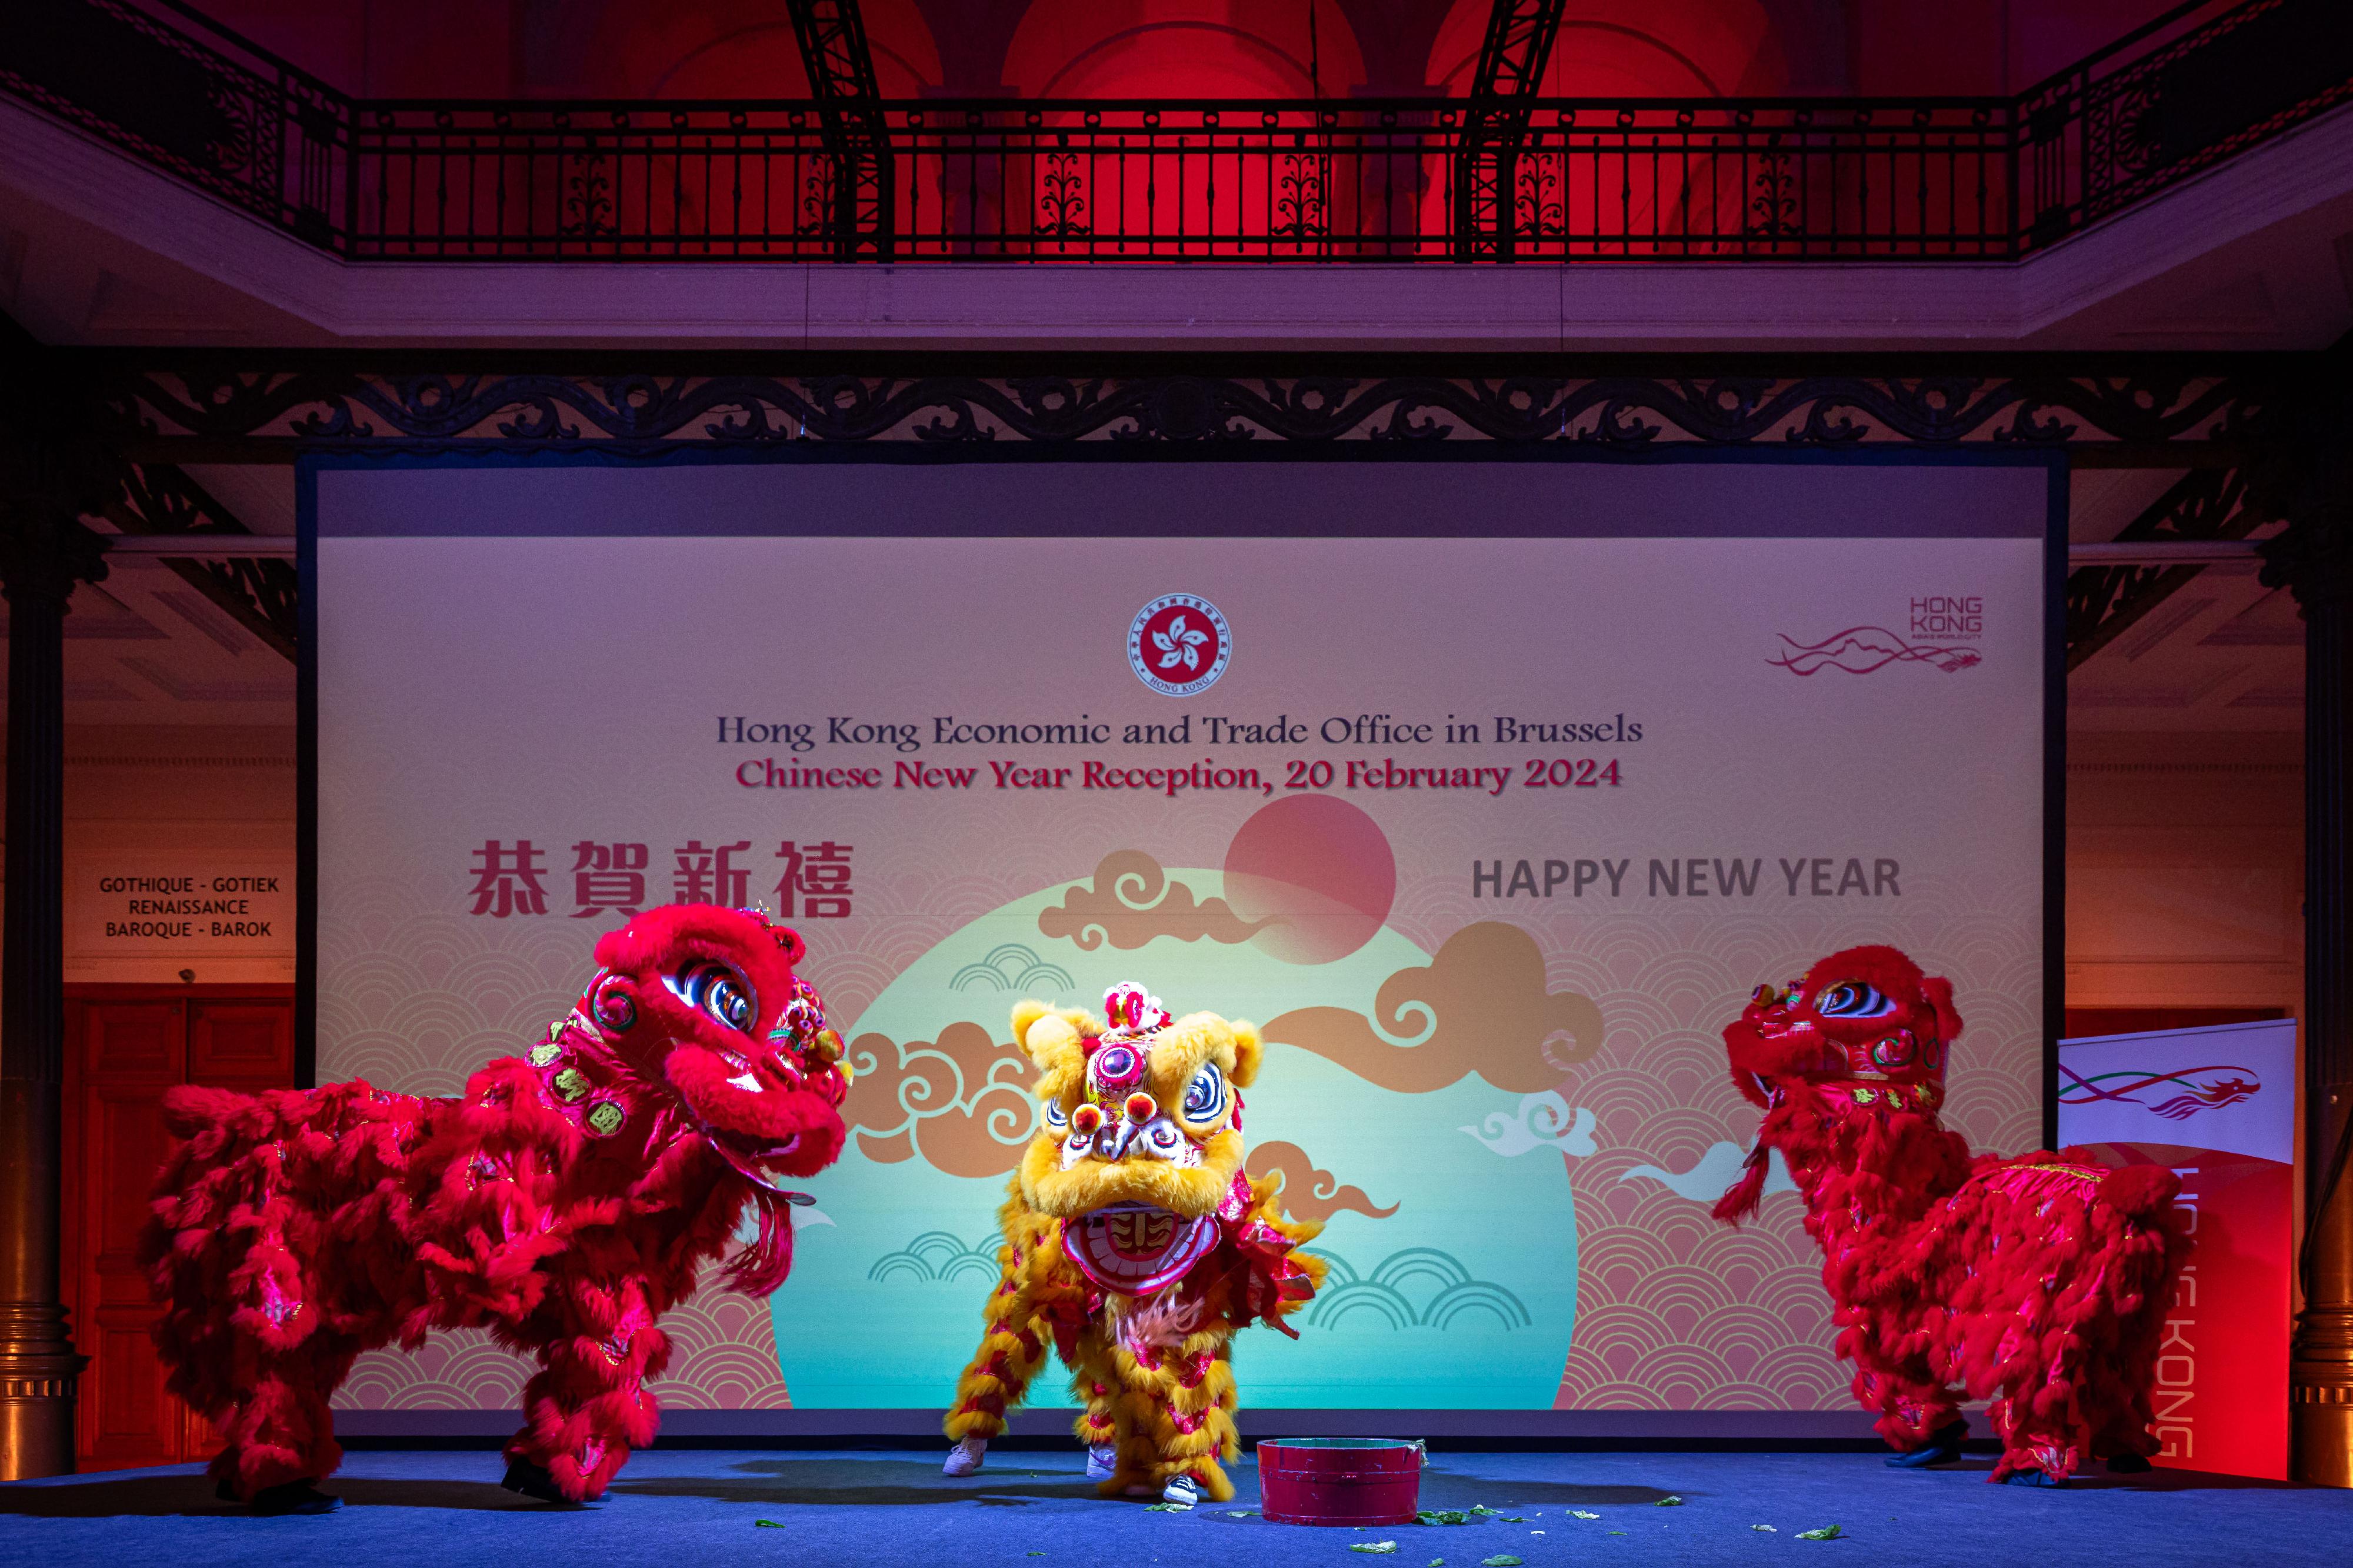 Photo shows the traditional lion dance staged in the Chinese New Year reception held in Brussels, Belgium on February 20 (Brussels time).